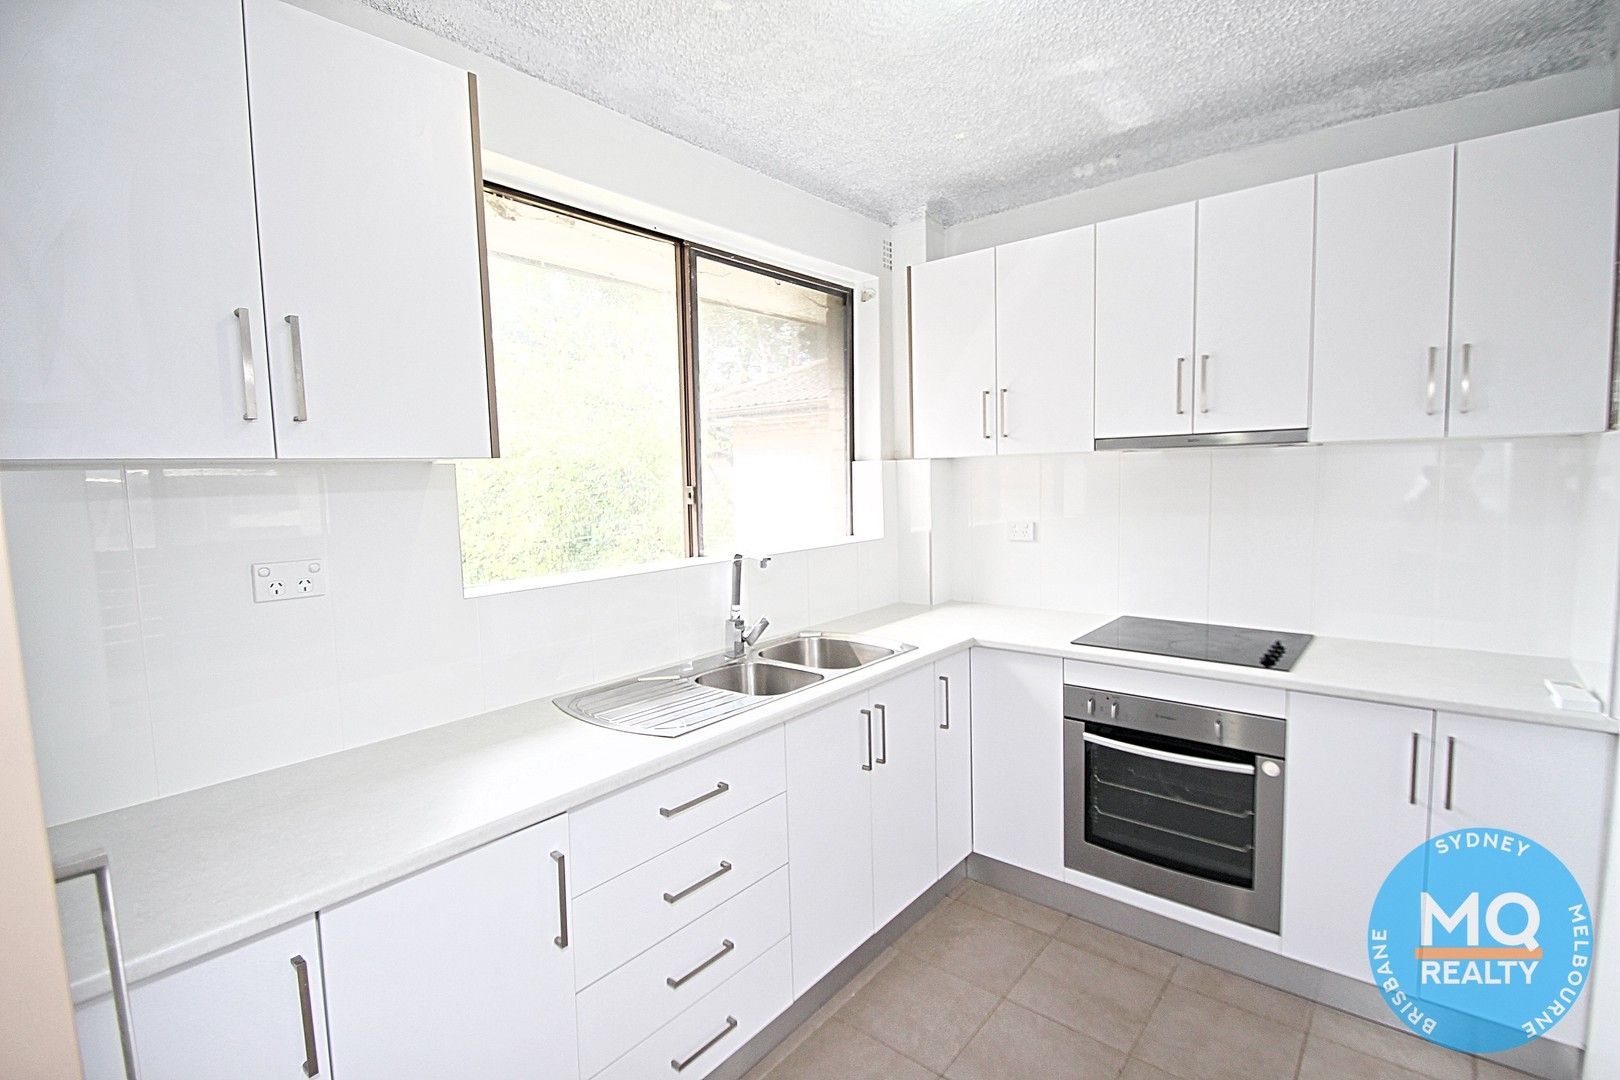 2 bedrooms Apartment / Unit / Flat in 13/74-78 St Hillers Road AUBURN NSW, 2144